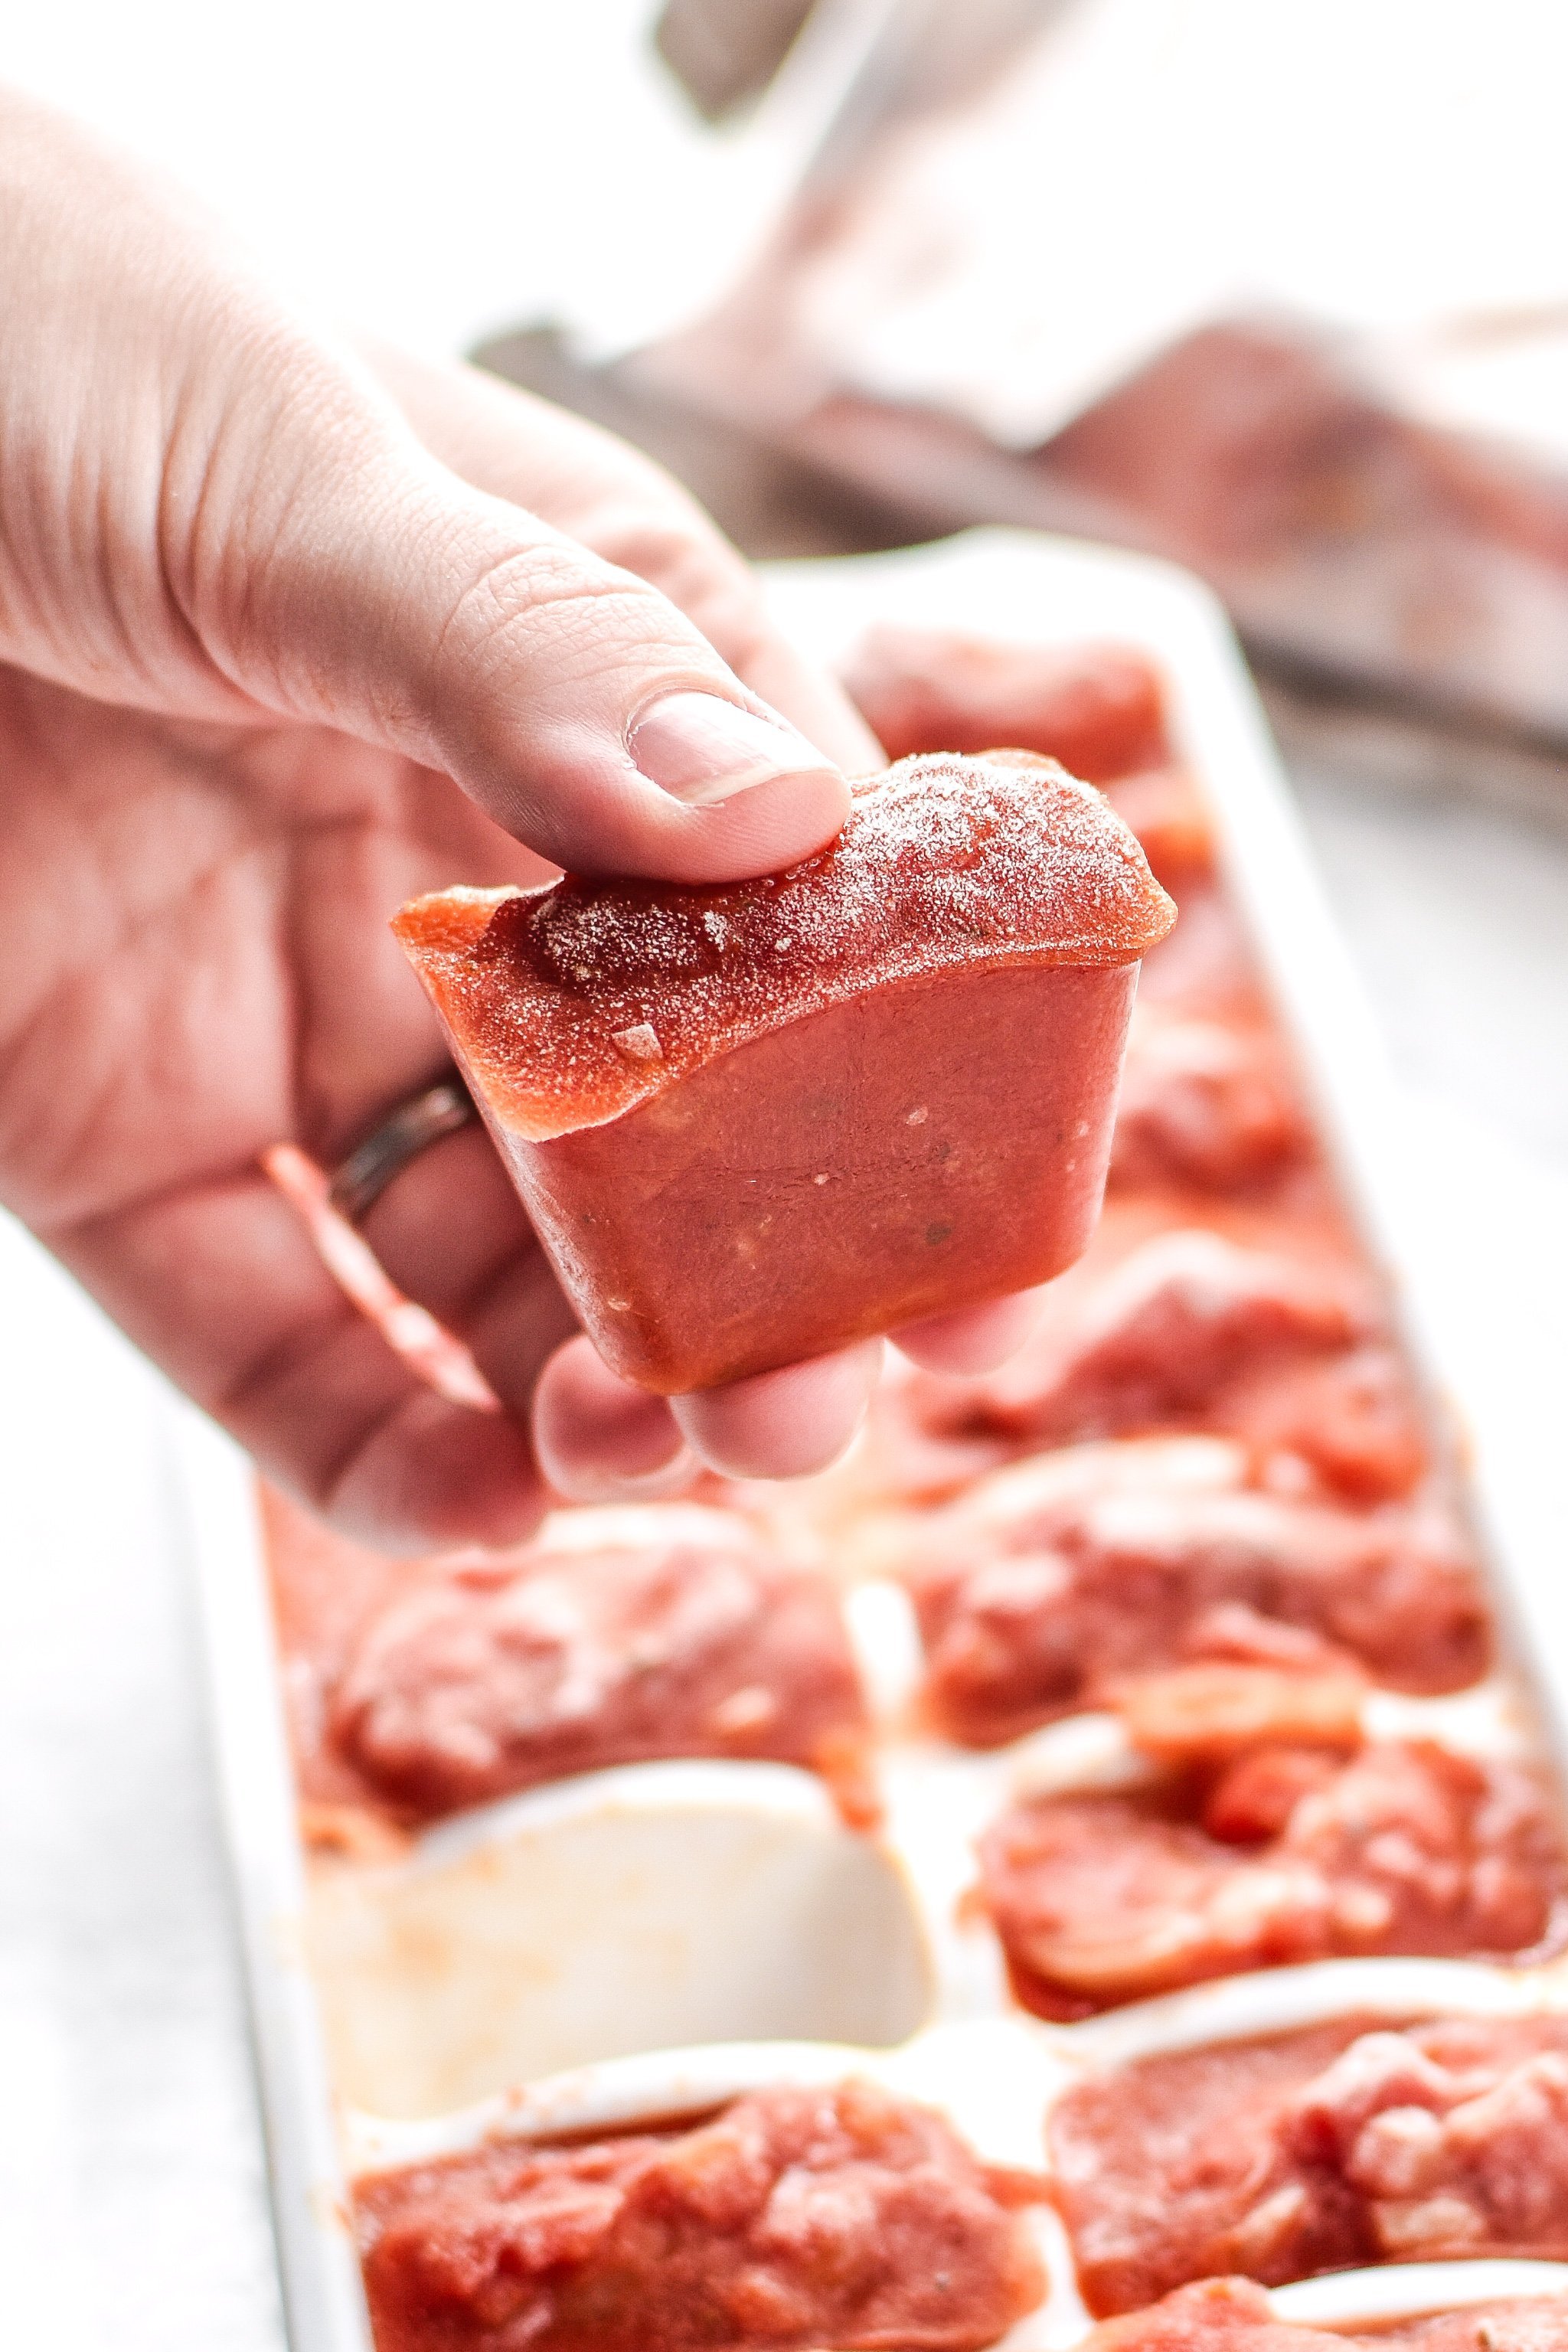 Ice cubes of homemade pizza sauce